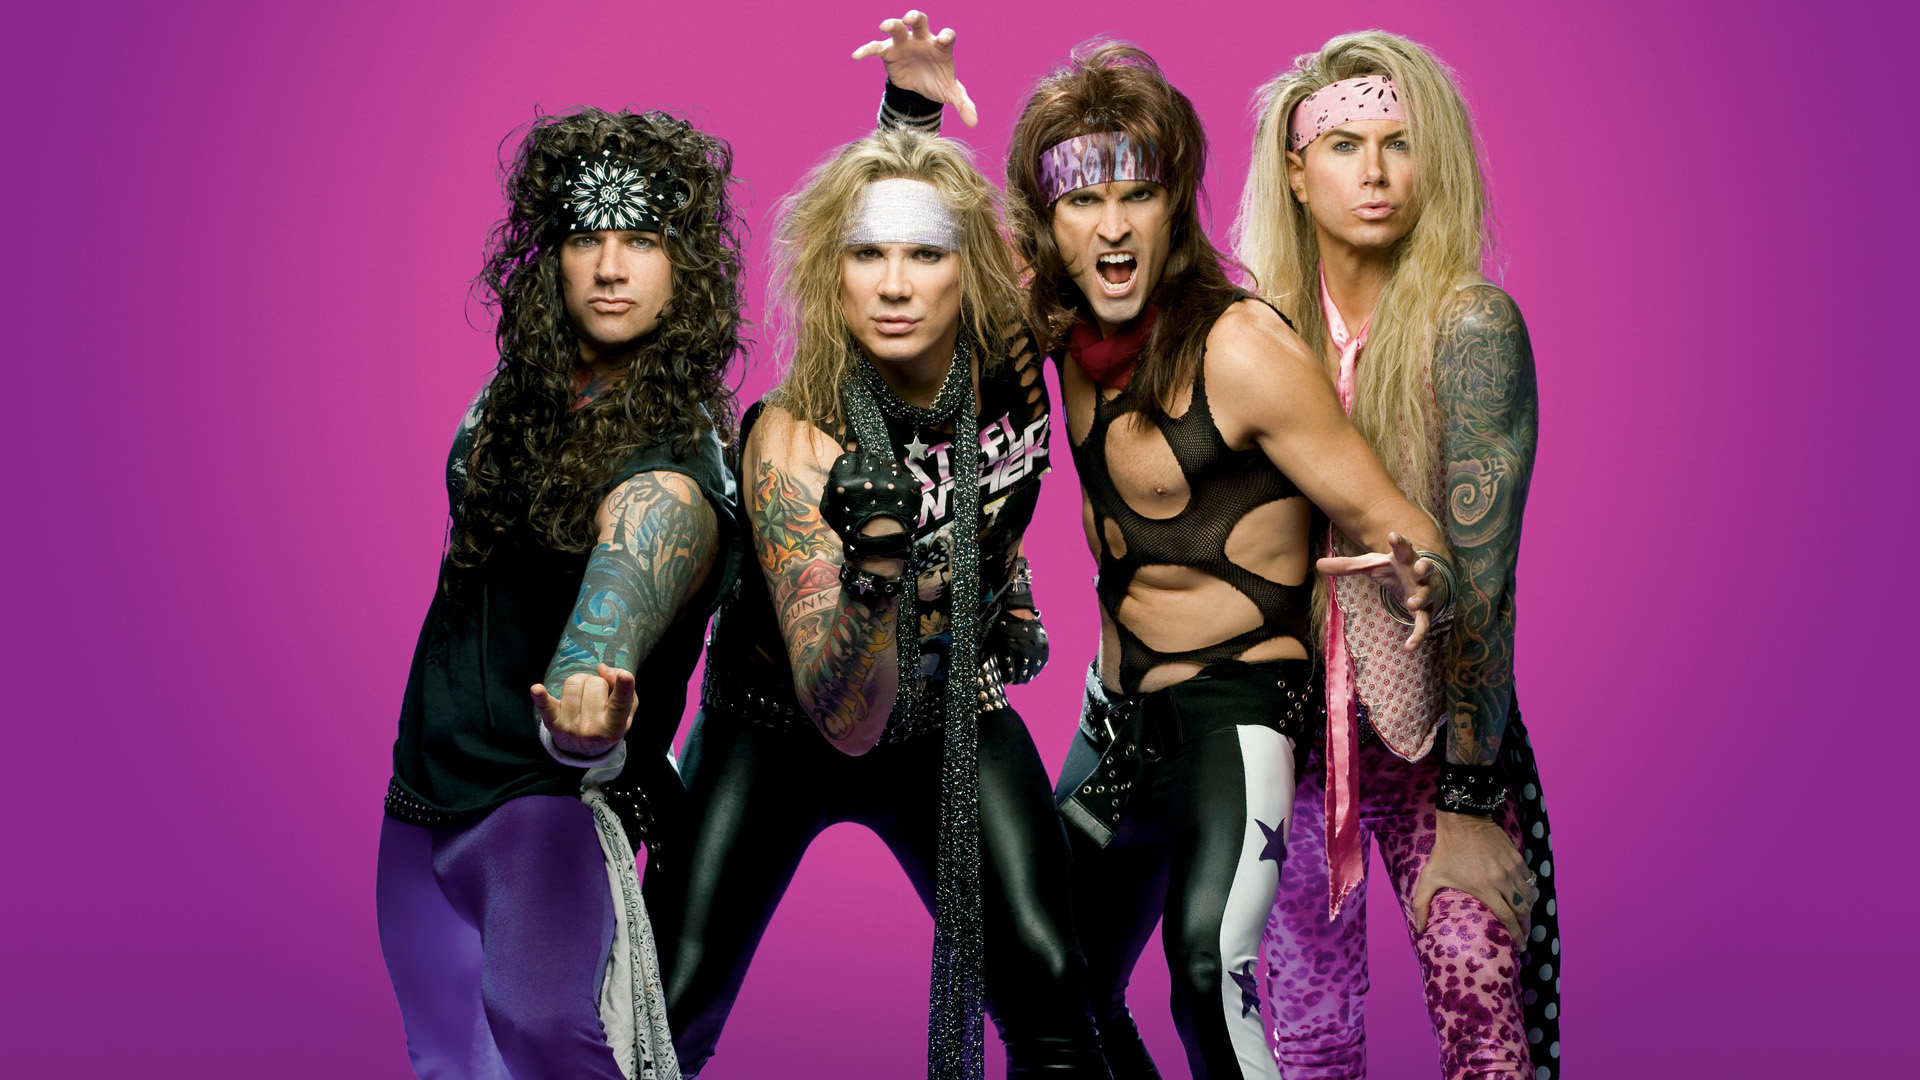 Steel_Panther_band.jpg